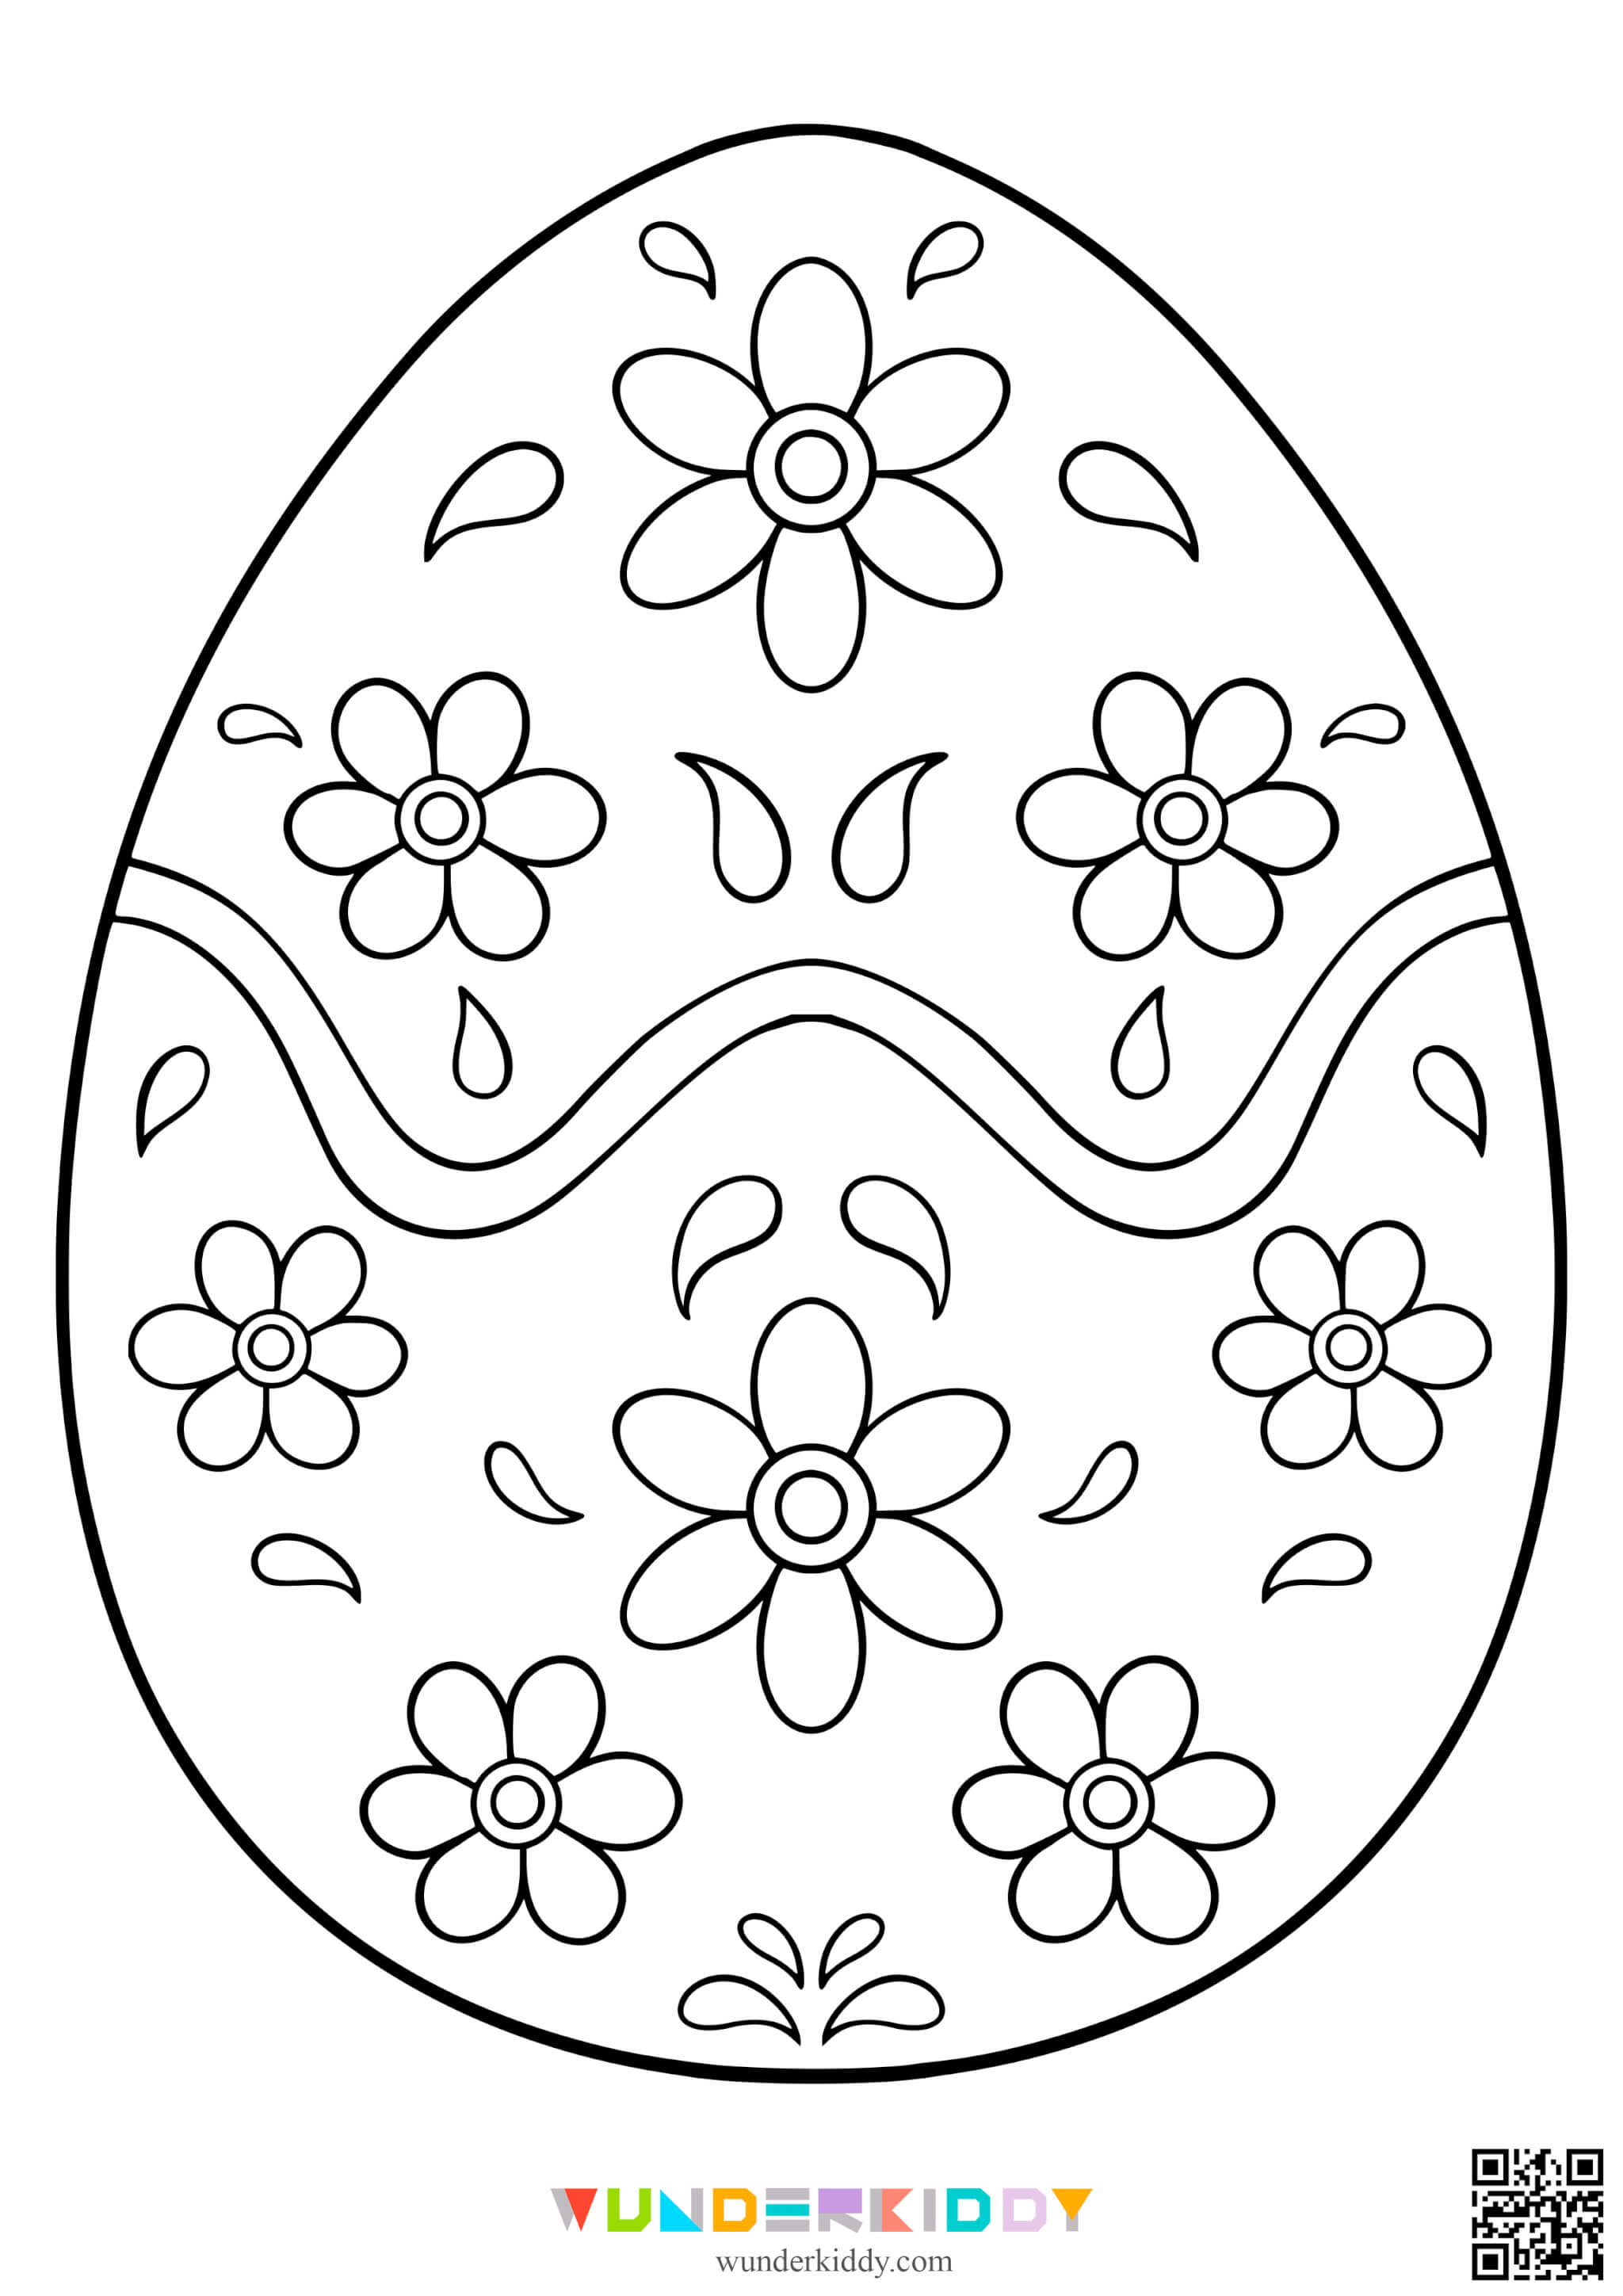 Printable Easter Coloring Pages